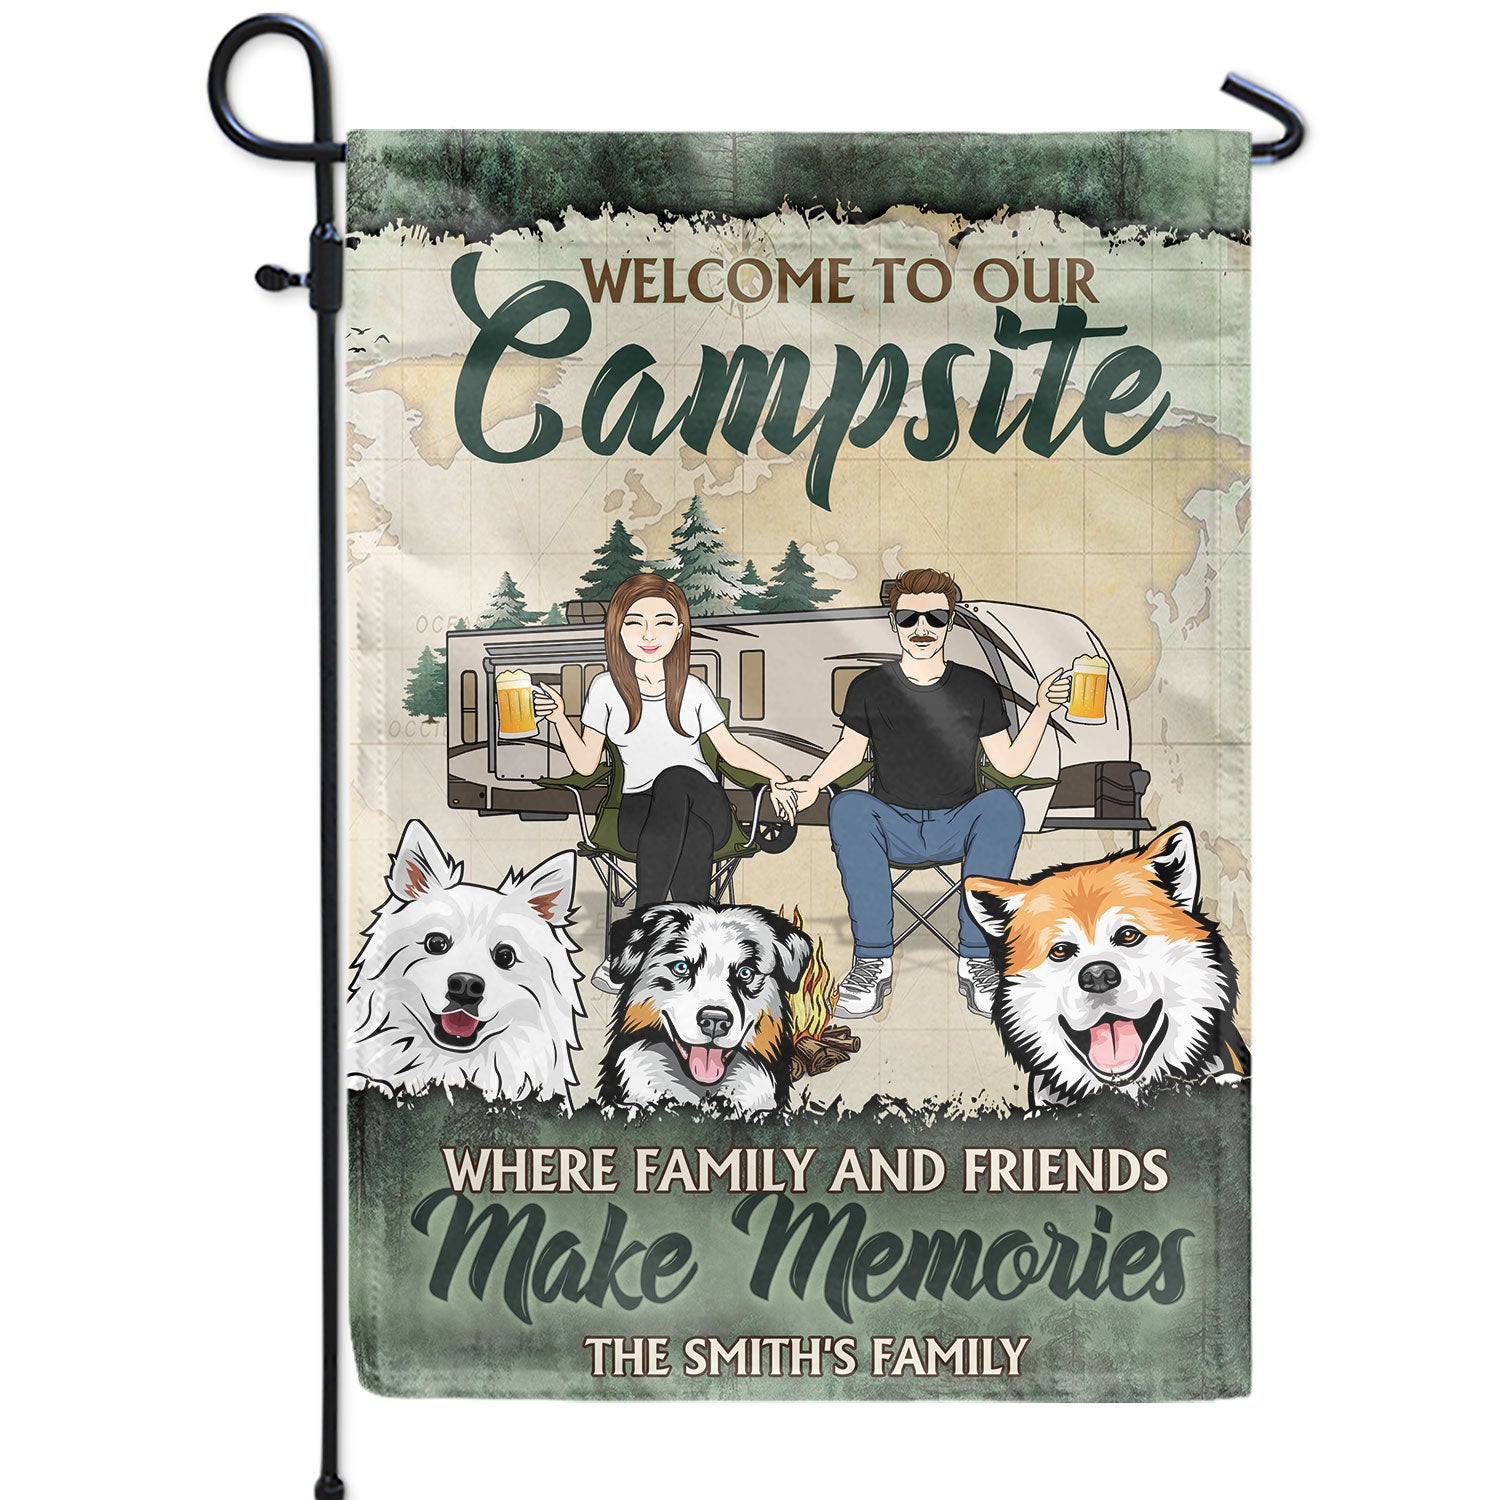 Where Family And Friends Make Memories - Gift For Pet, Camping Lovers, Campsite, Camping Decor, Couple, Family - Personalized Custom Flag